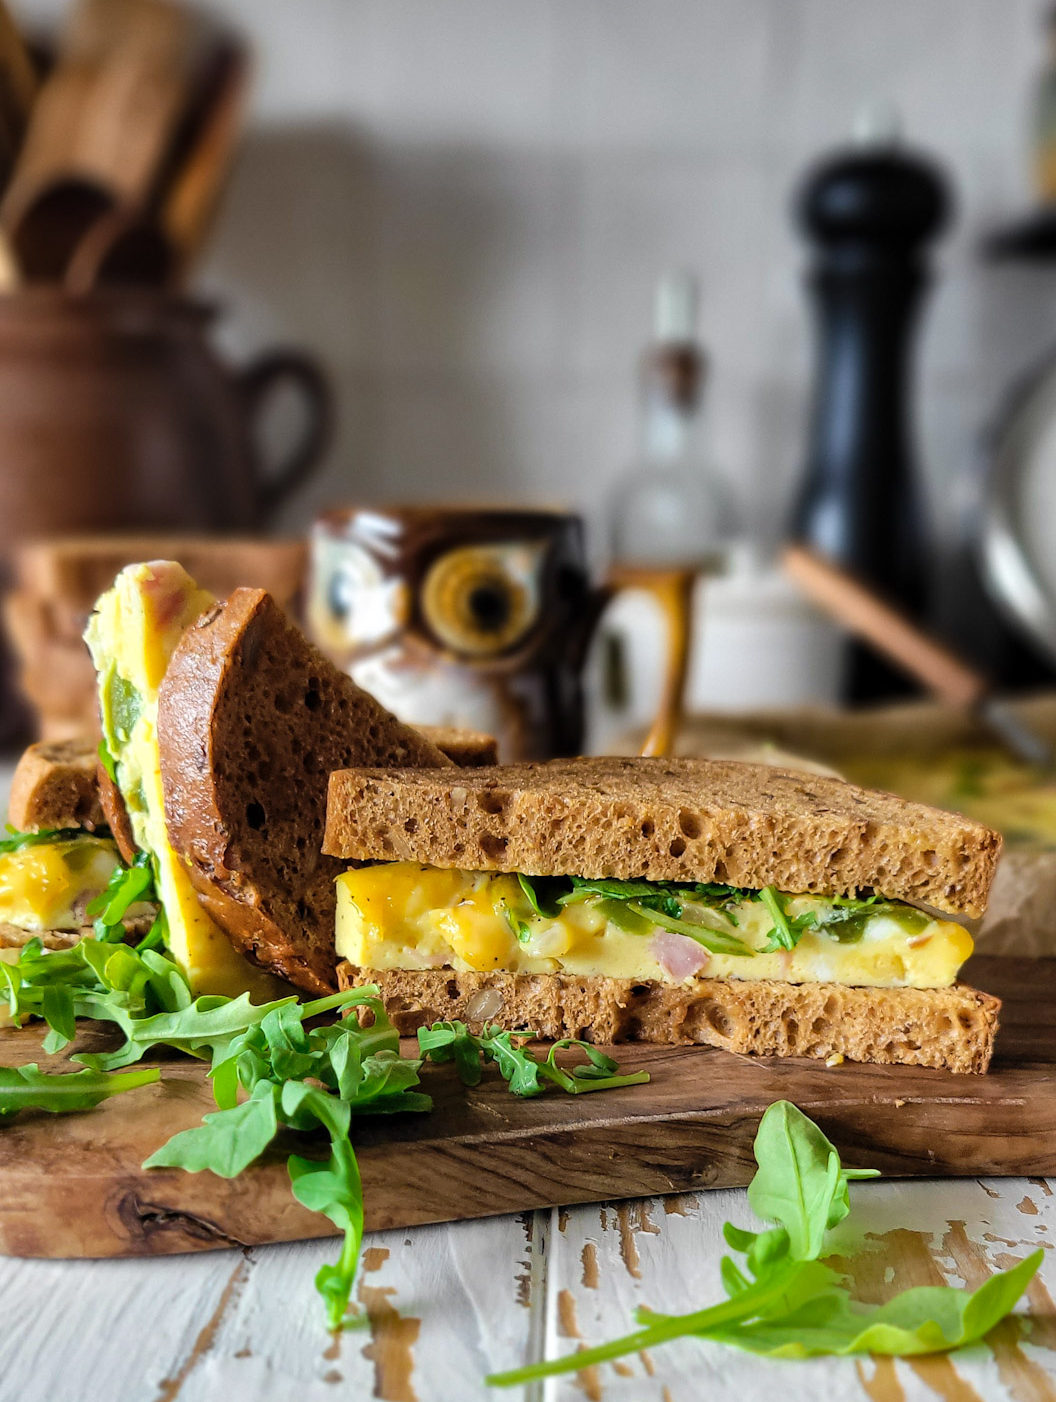 A toasted Western Sandwich is made and sitting on a cutting board, with arugula strewn around, and a mug of coffee in the background.